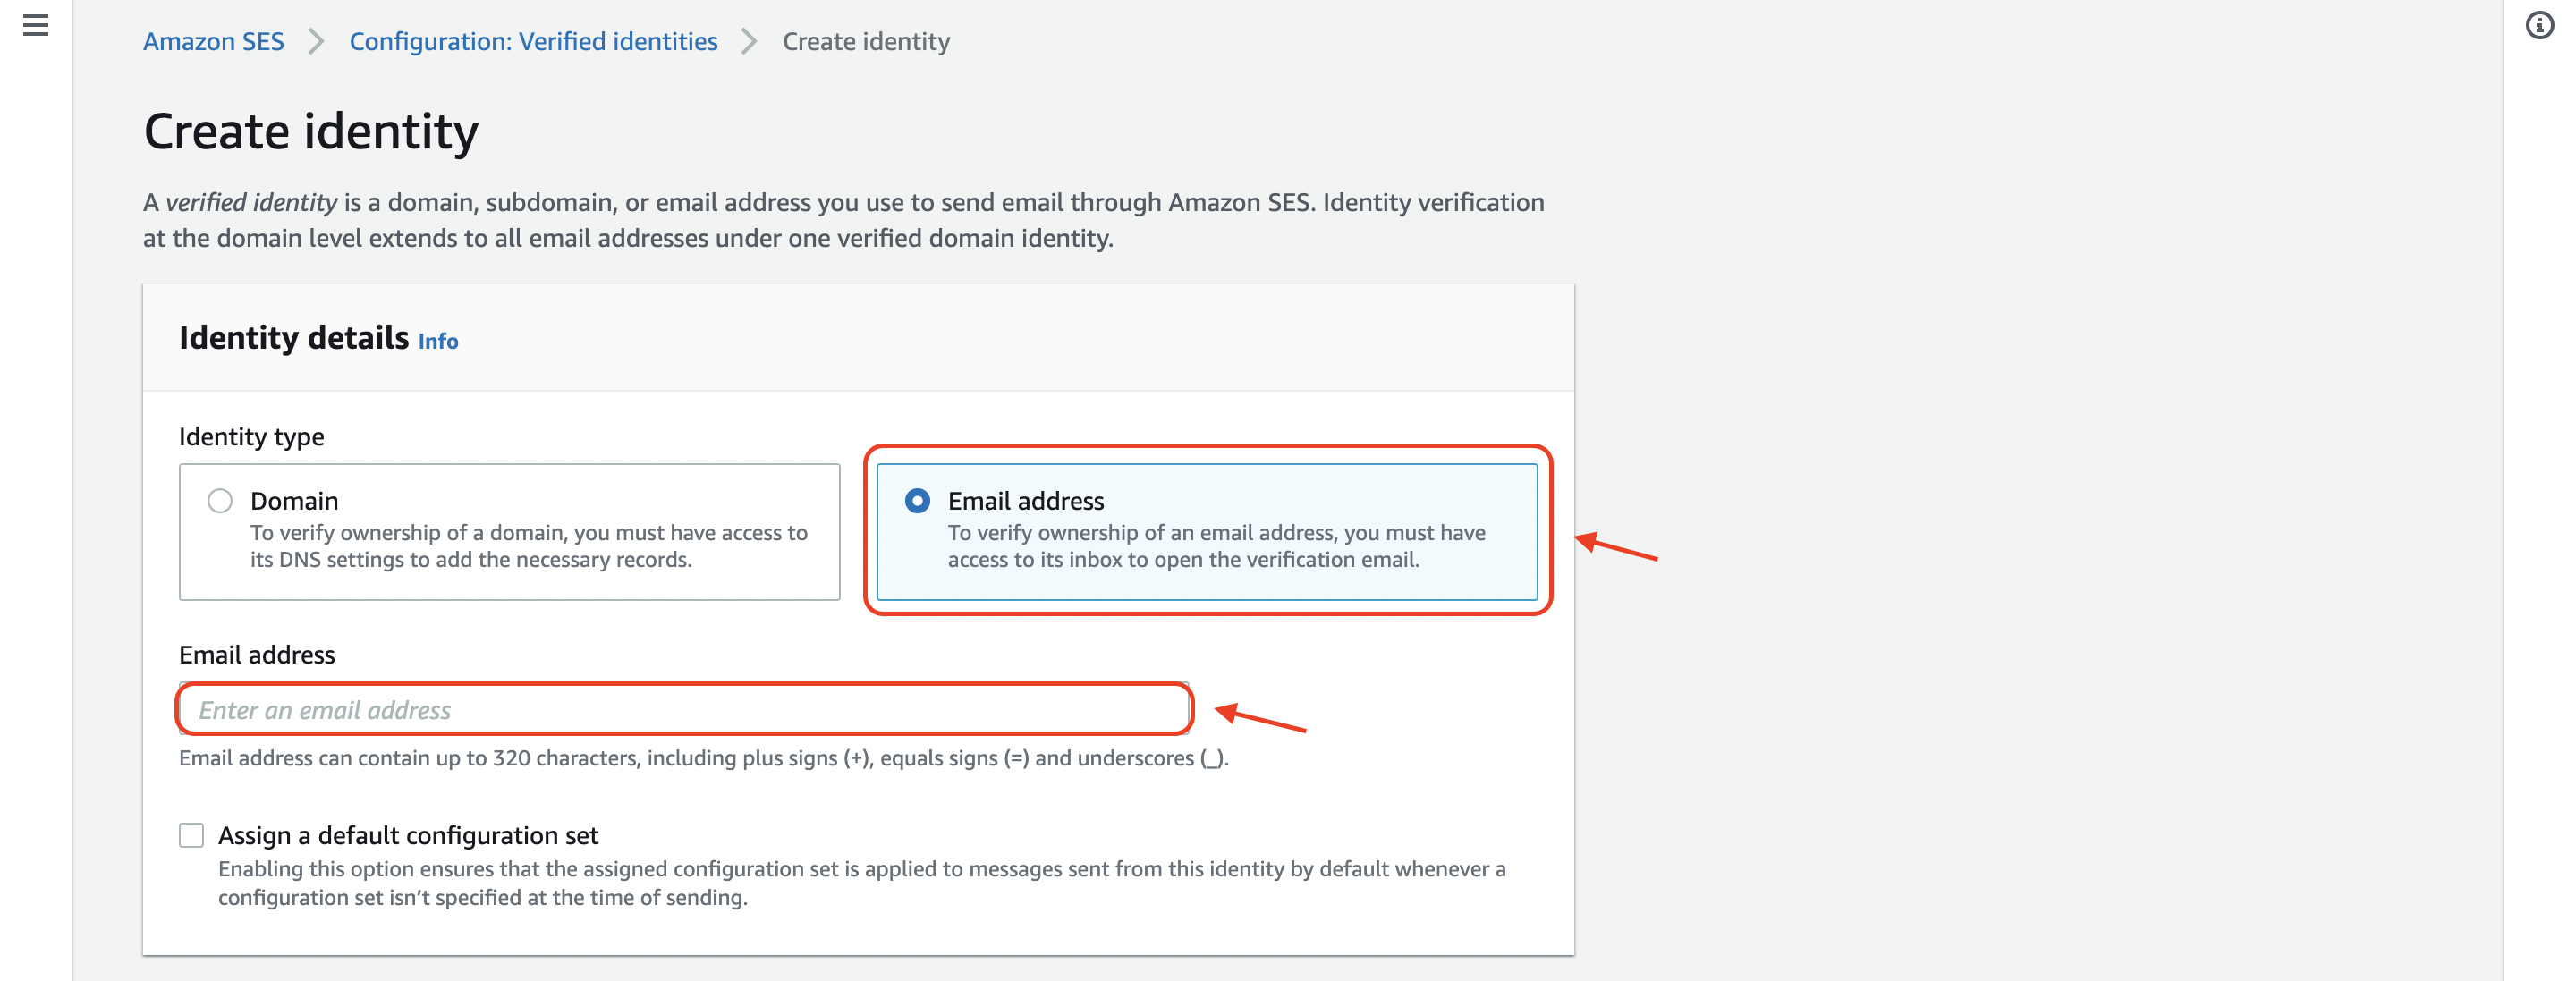 Enter email address by clicking email address option